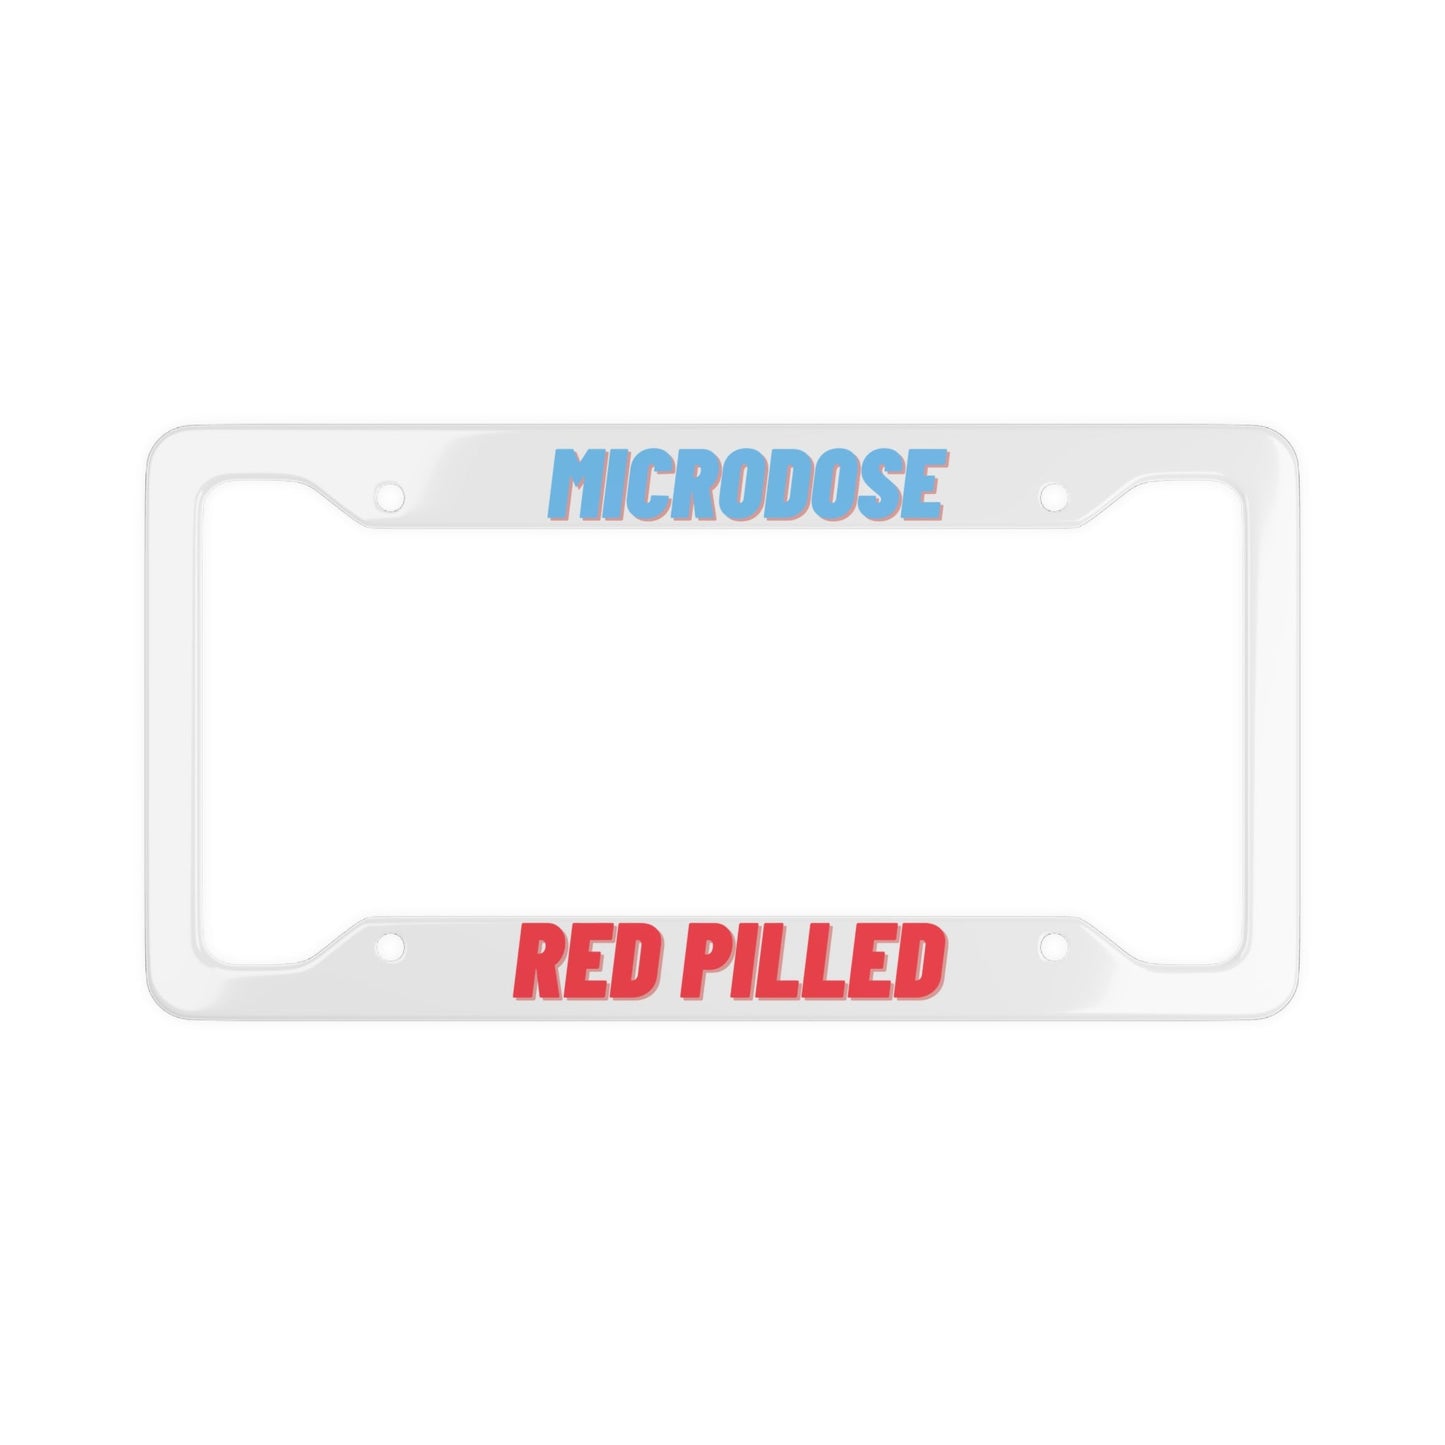 Accessories - Microdose Red Pilled License Plate Frame